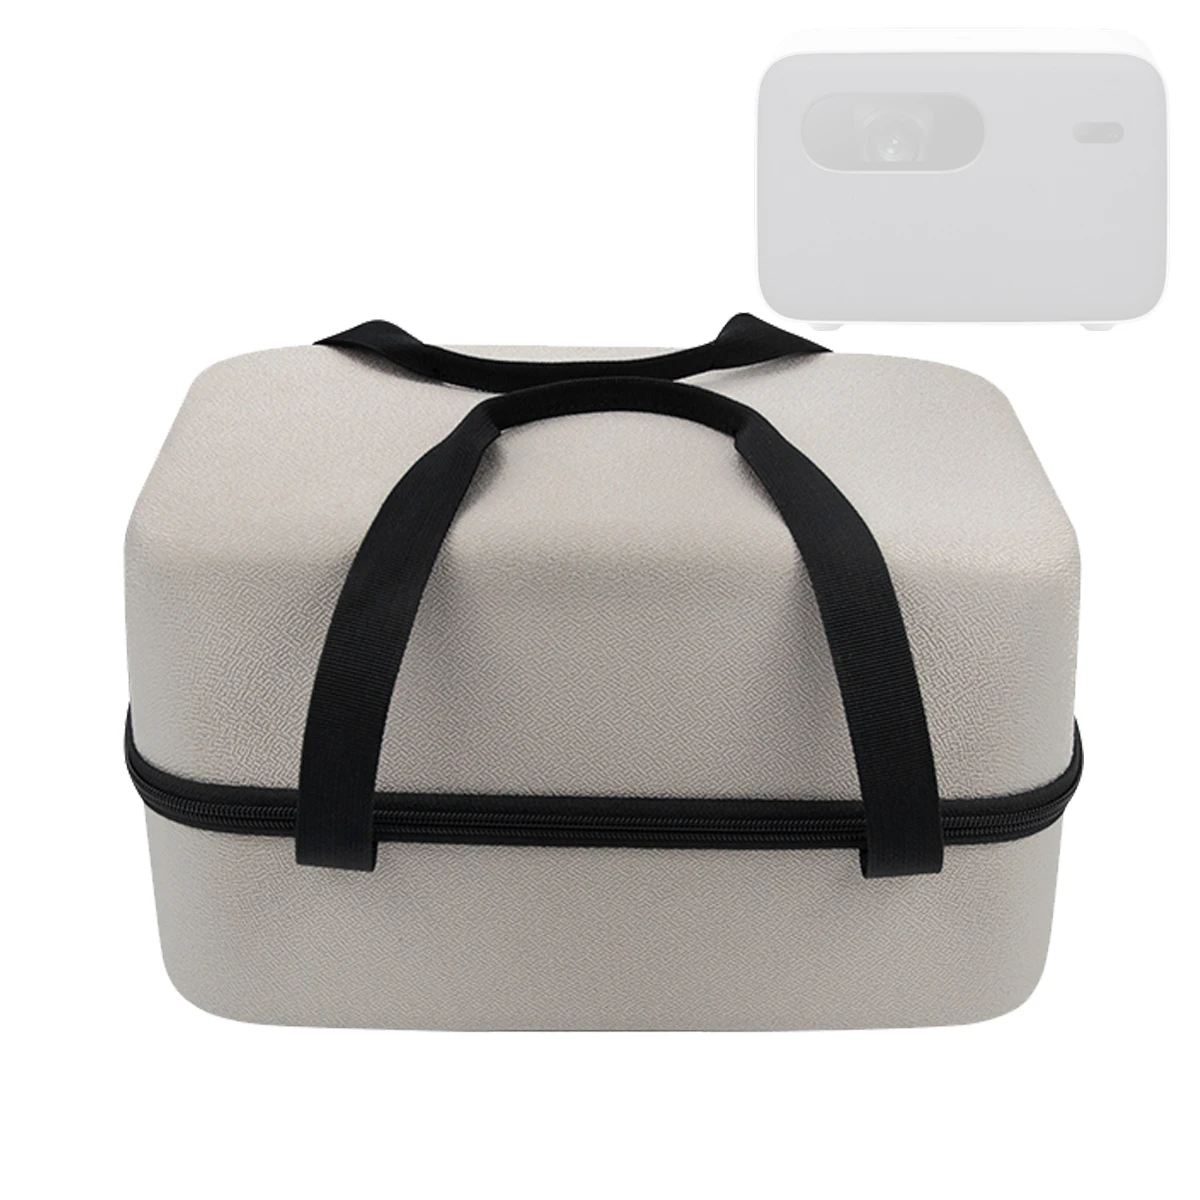 

Hard EVA Projector Storage Bag for Xiaomi Mijia Mi Projector 2 Pro Protect Box for JMGO J10 Portable Bags Travel Carrying Case